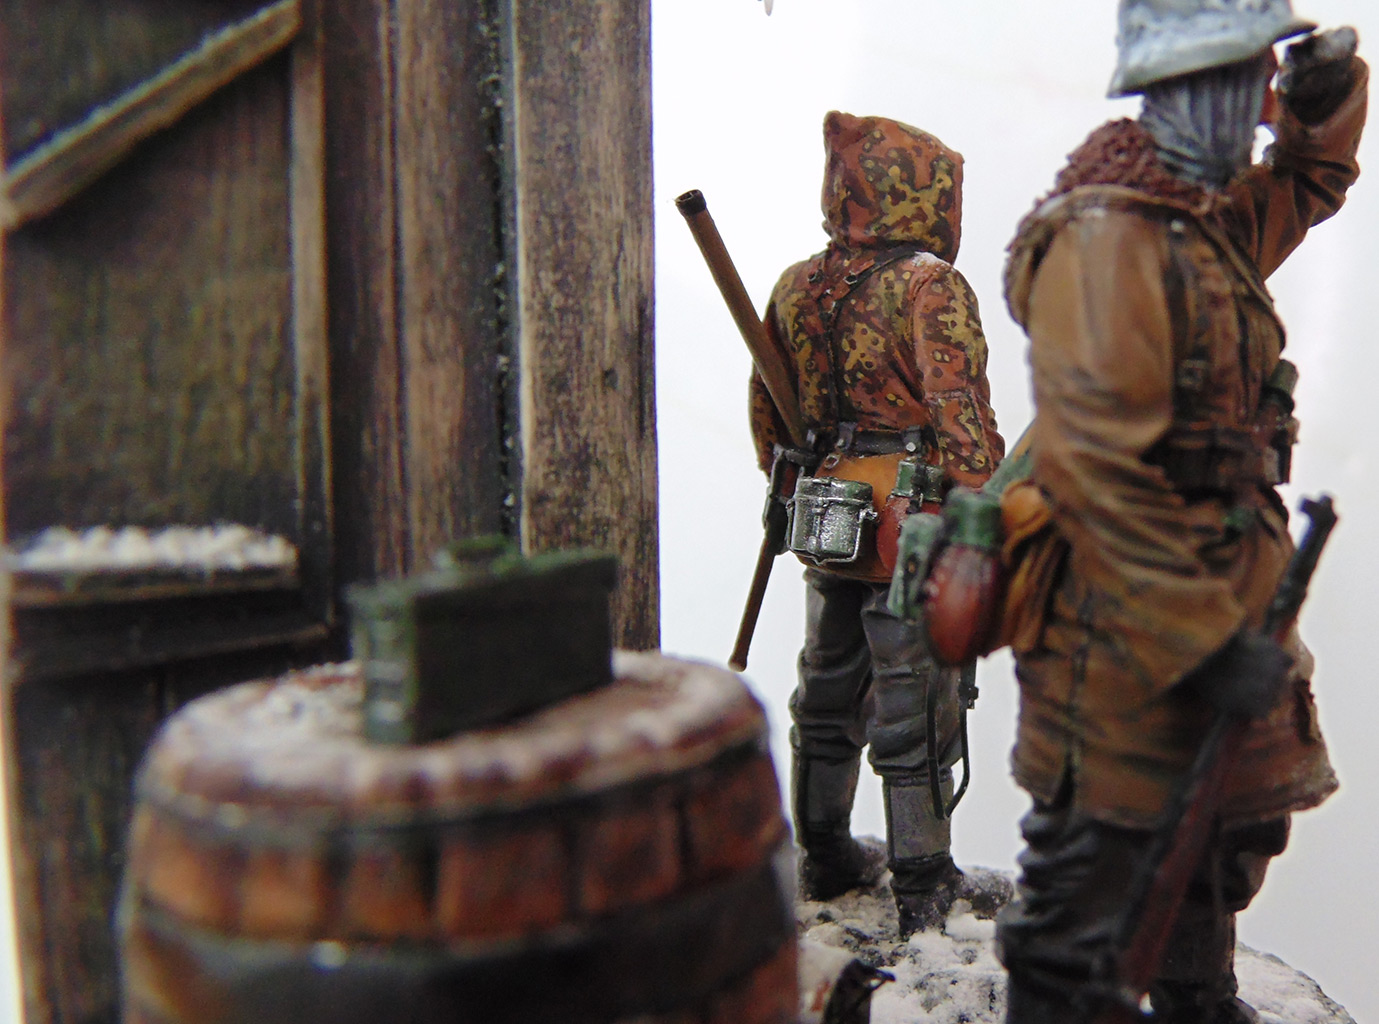 Dioramas and Vignettes: The last hope, photo #4